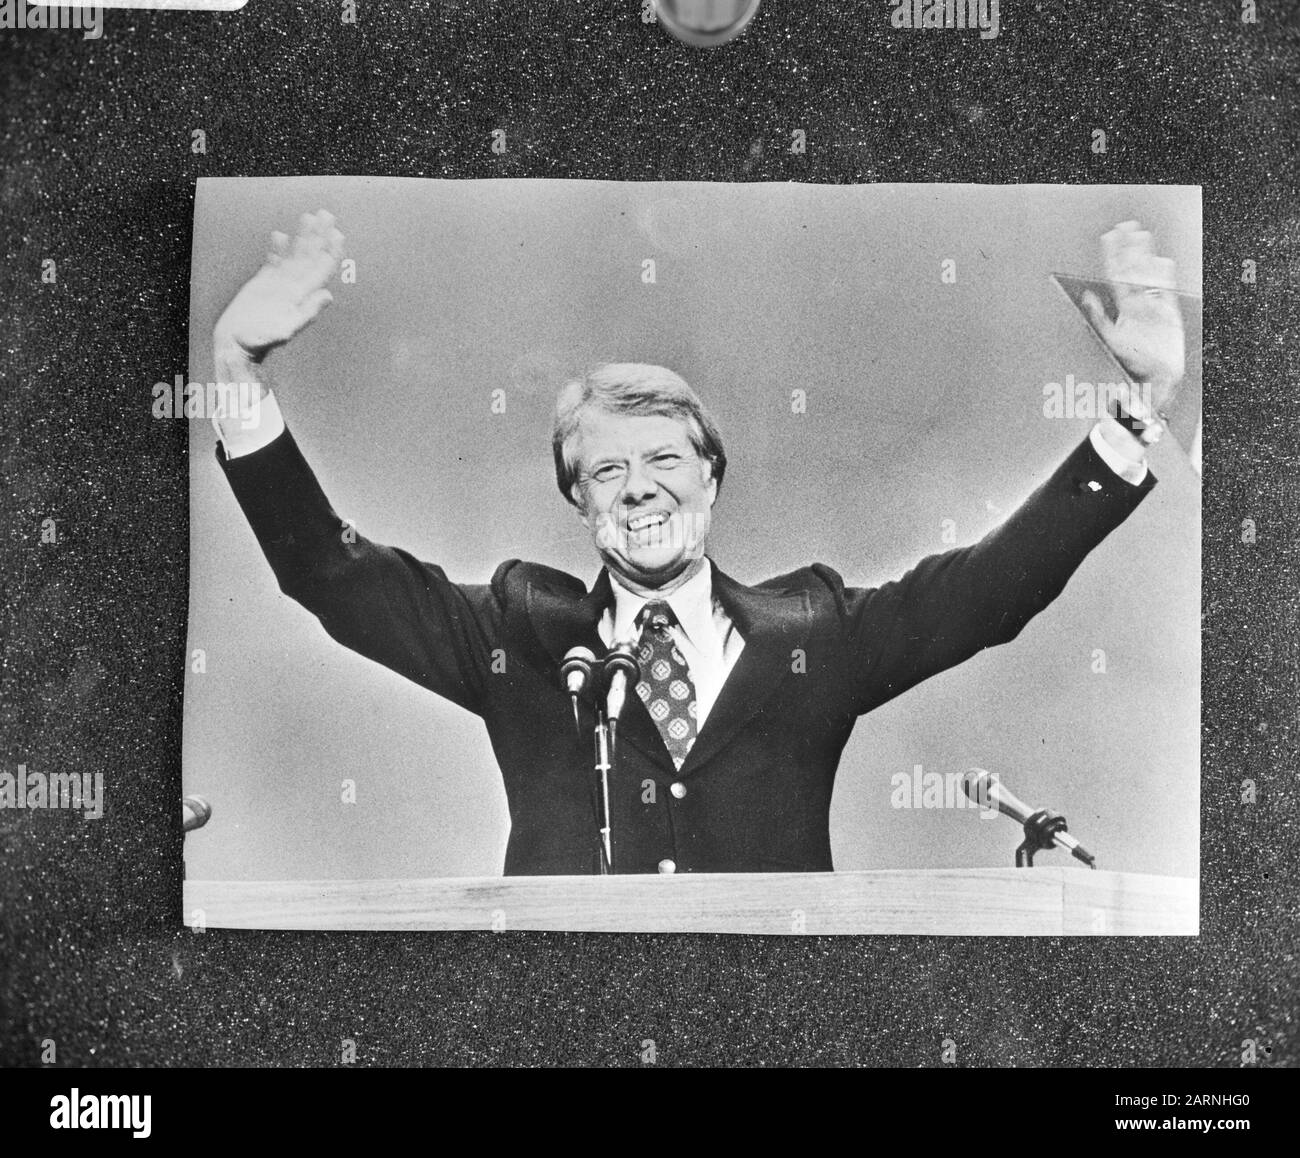 Election campaigns started in United States, democratic candidate Jimmy Carter Date: September 8, 1976 Location: America Keywords: political Person Name: Jimmy Carter Stock Photo